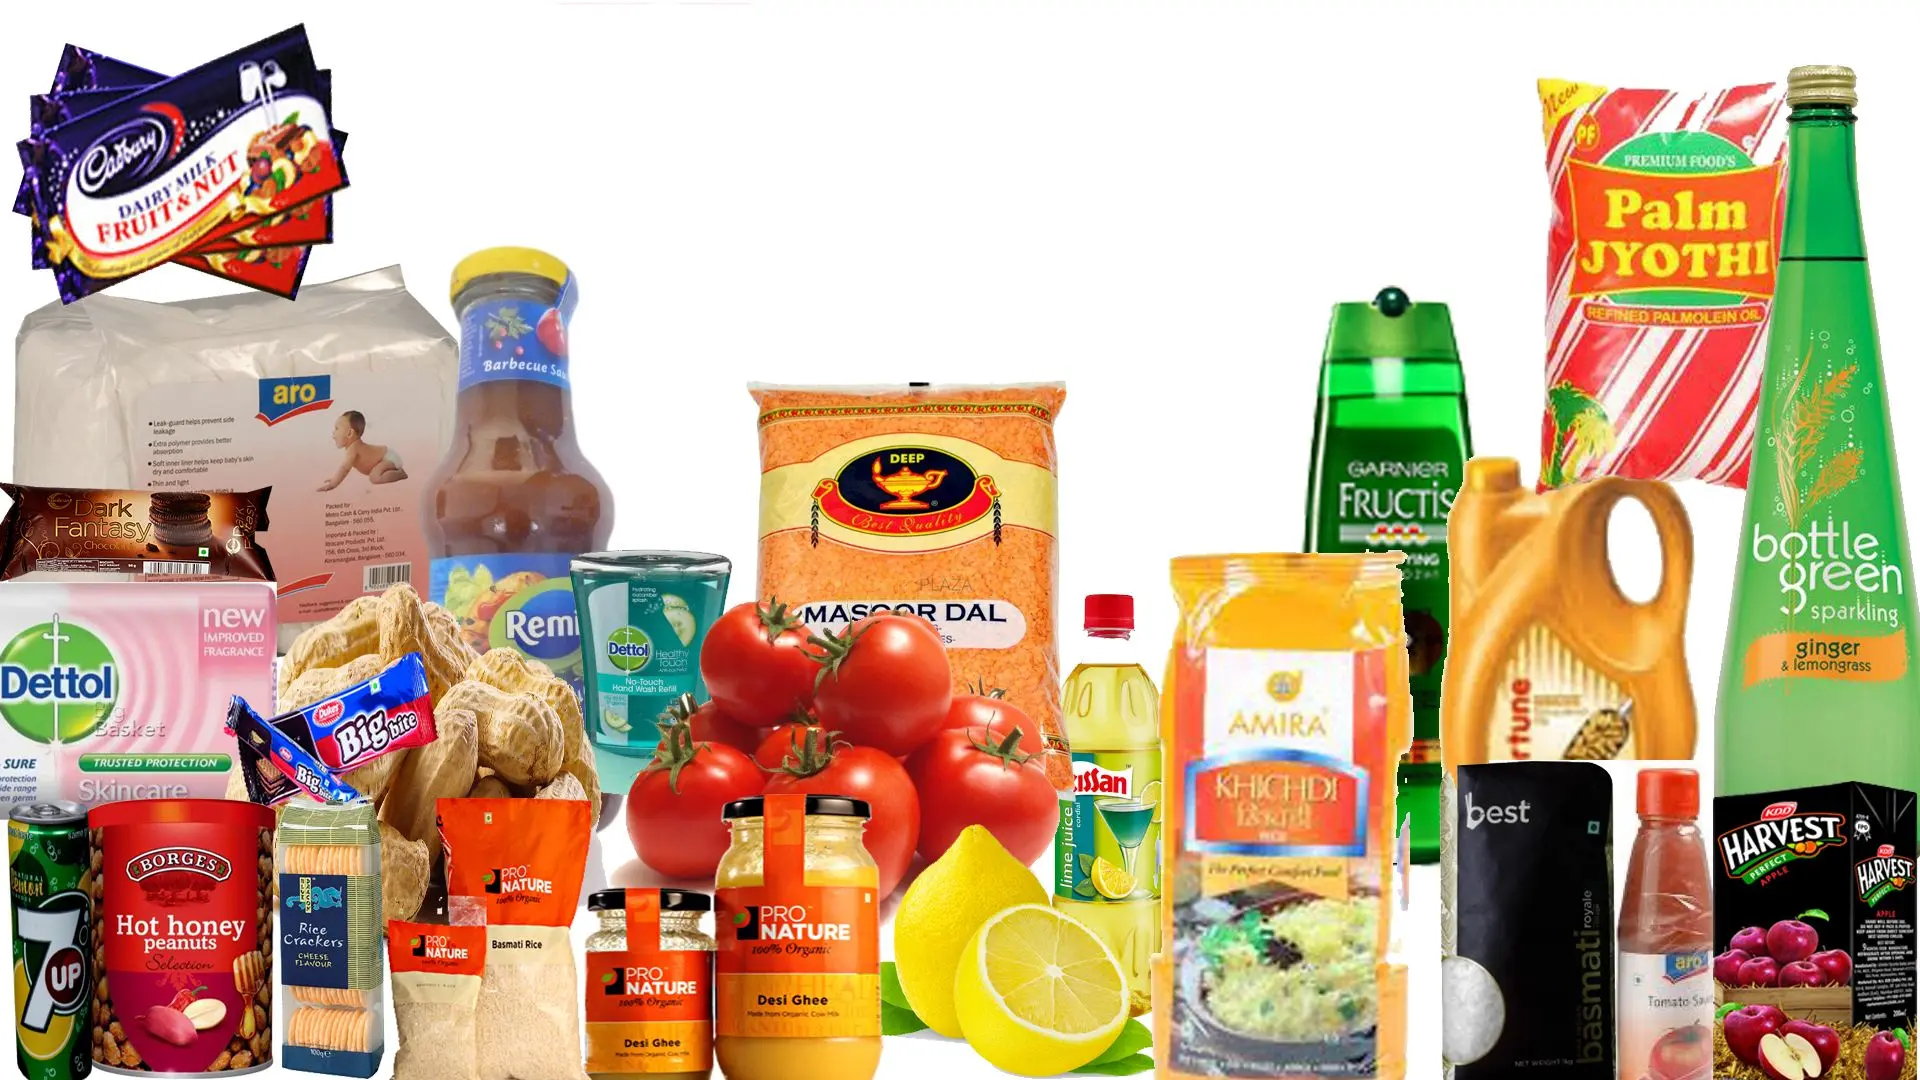 Grocery Stores in Kottayam, Kerala, Grocery Items